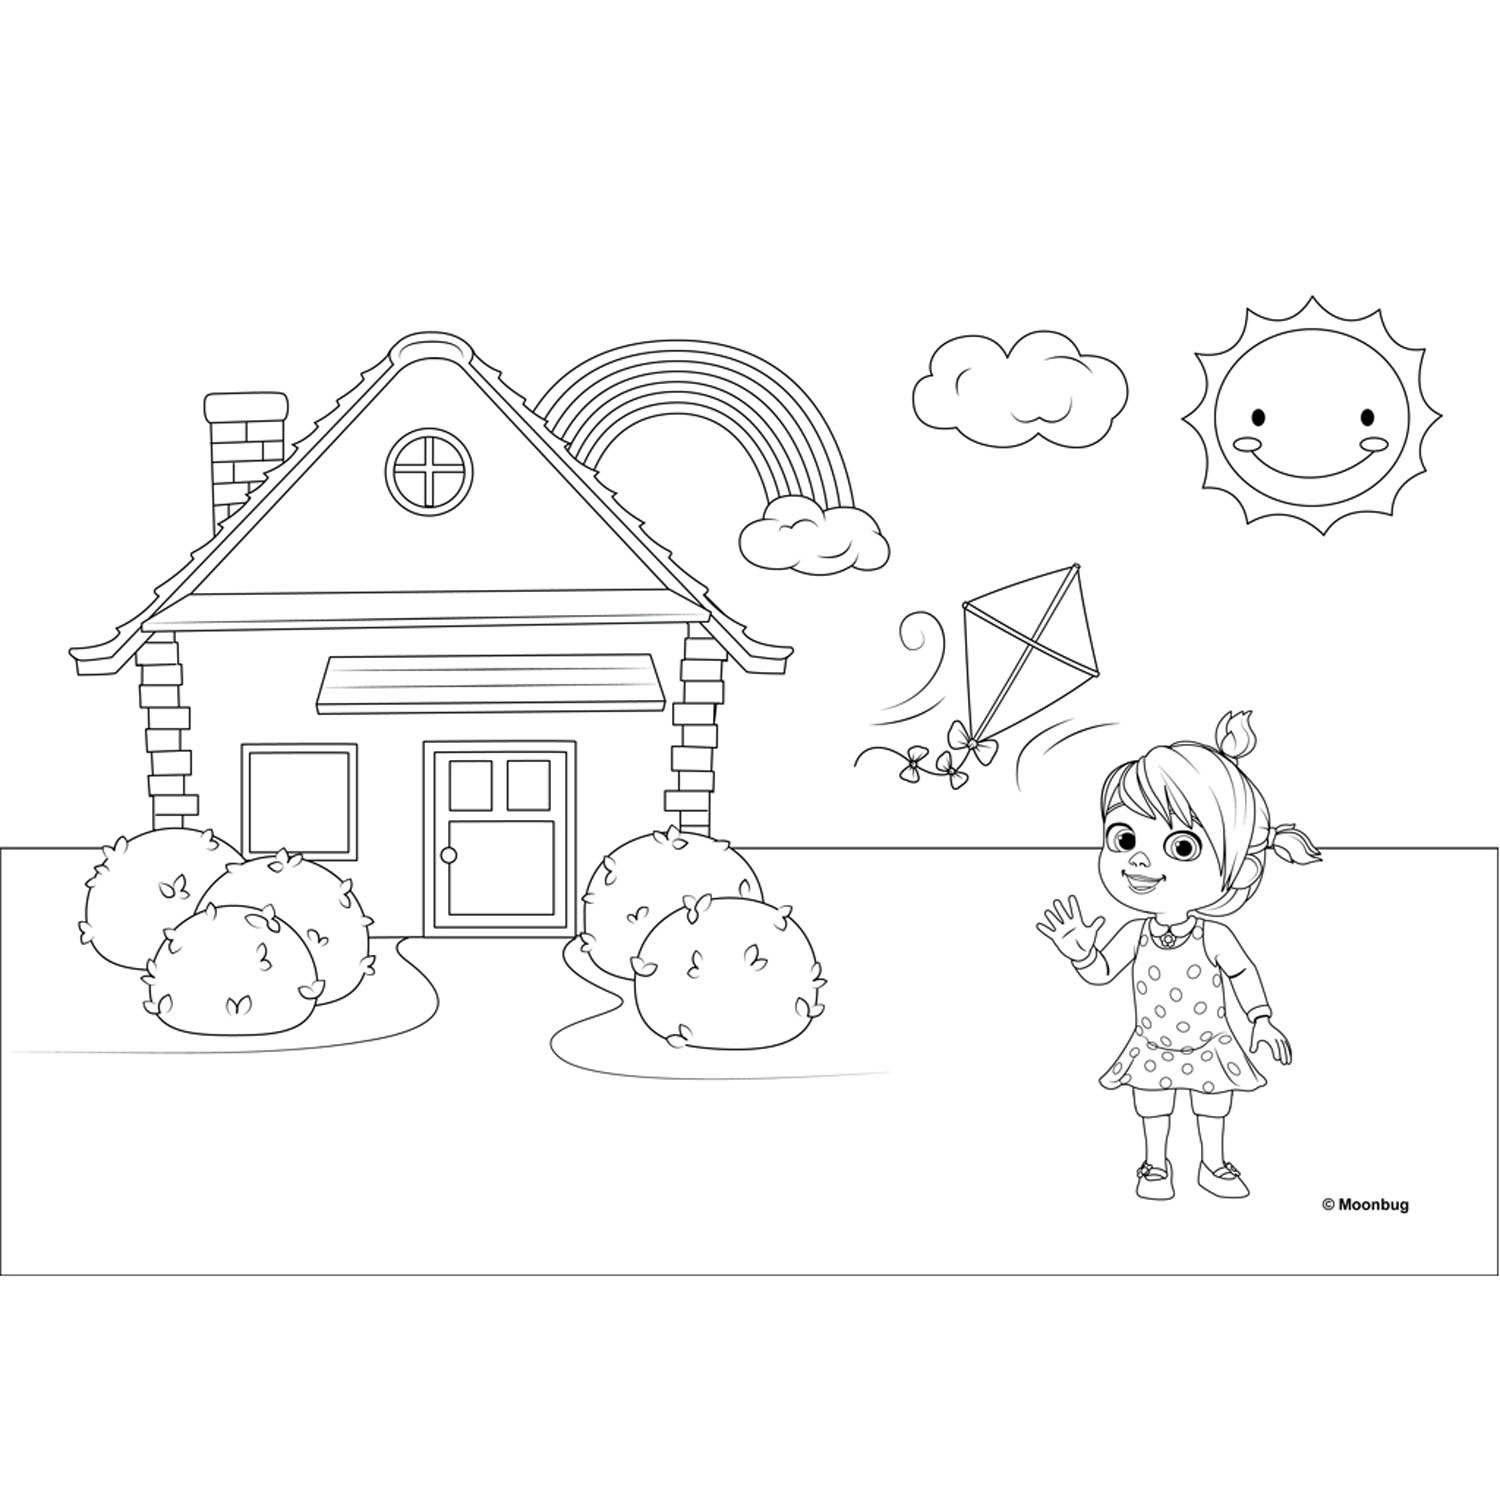 Cocomelon coloring pages